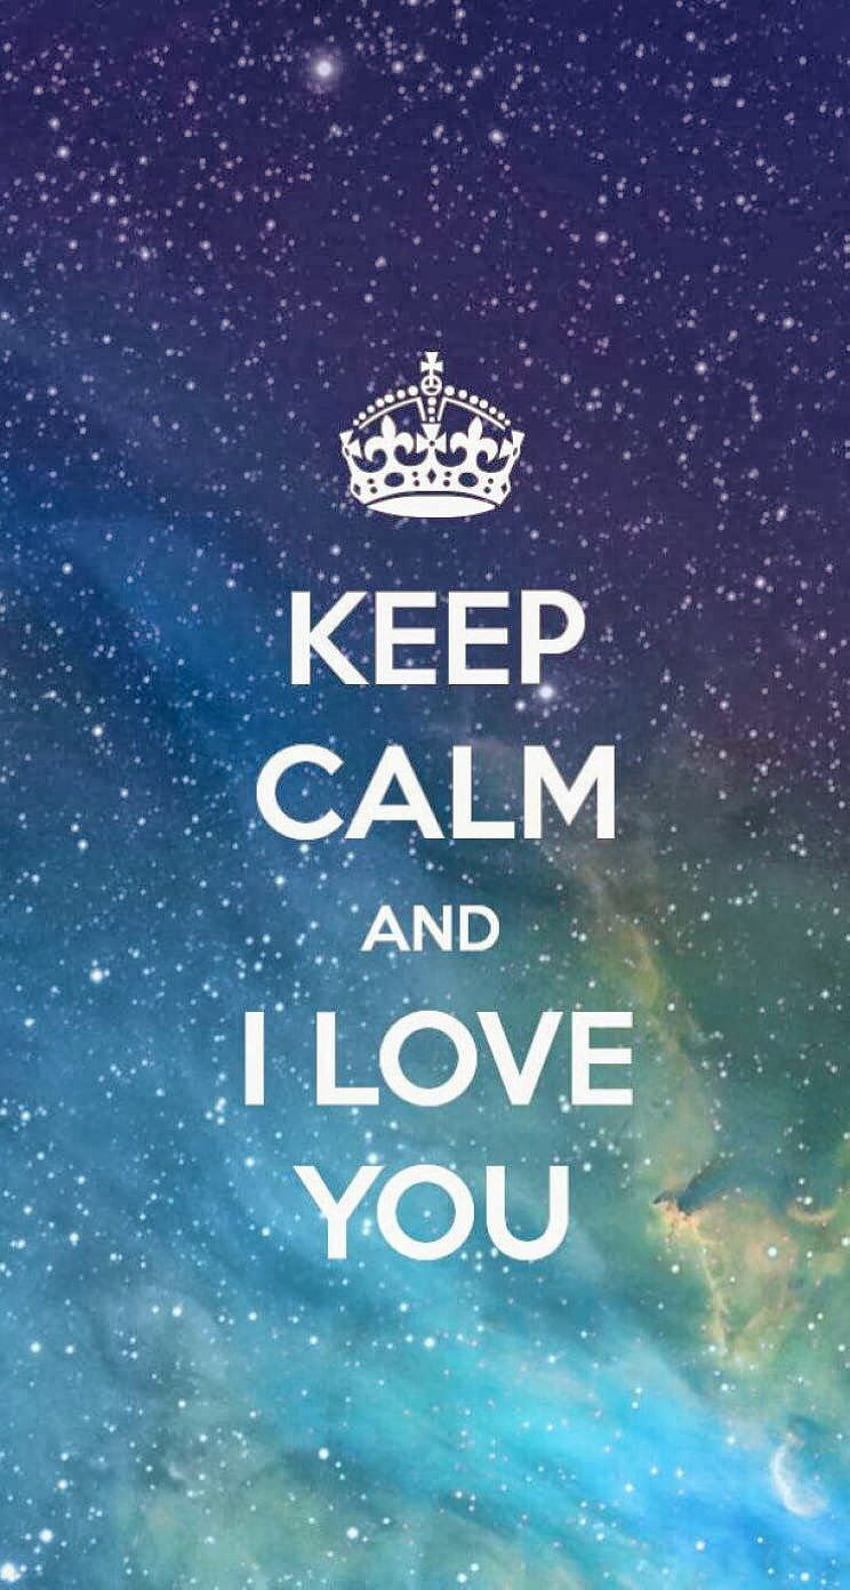 keep calm quotes about love